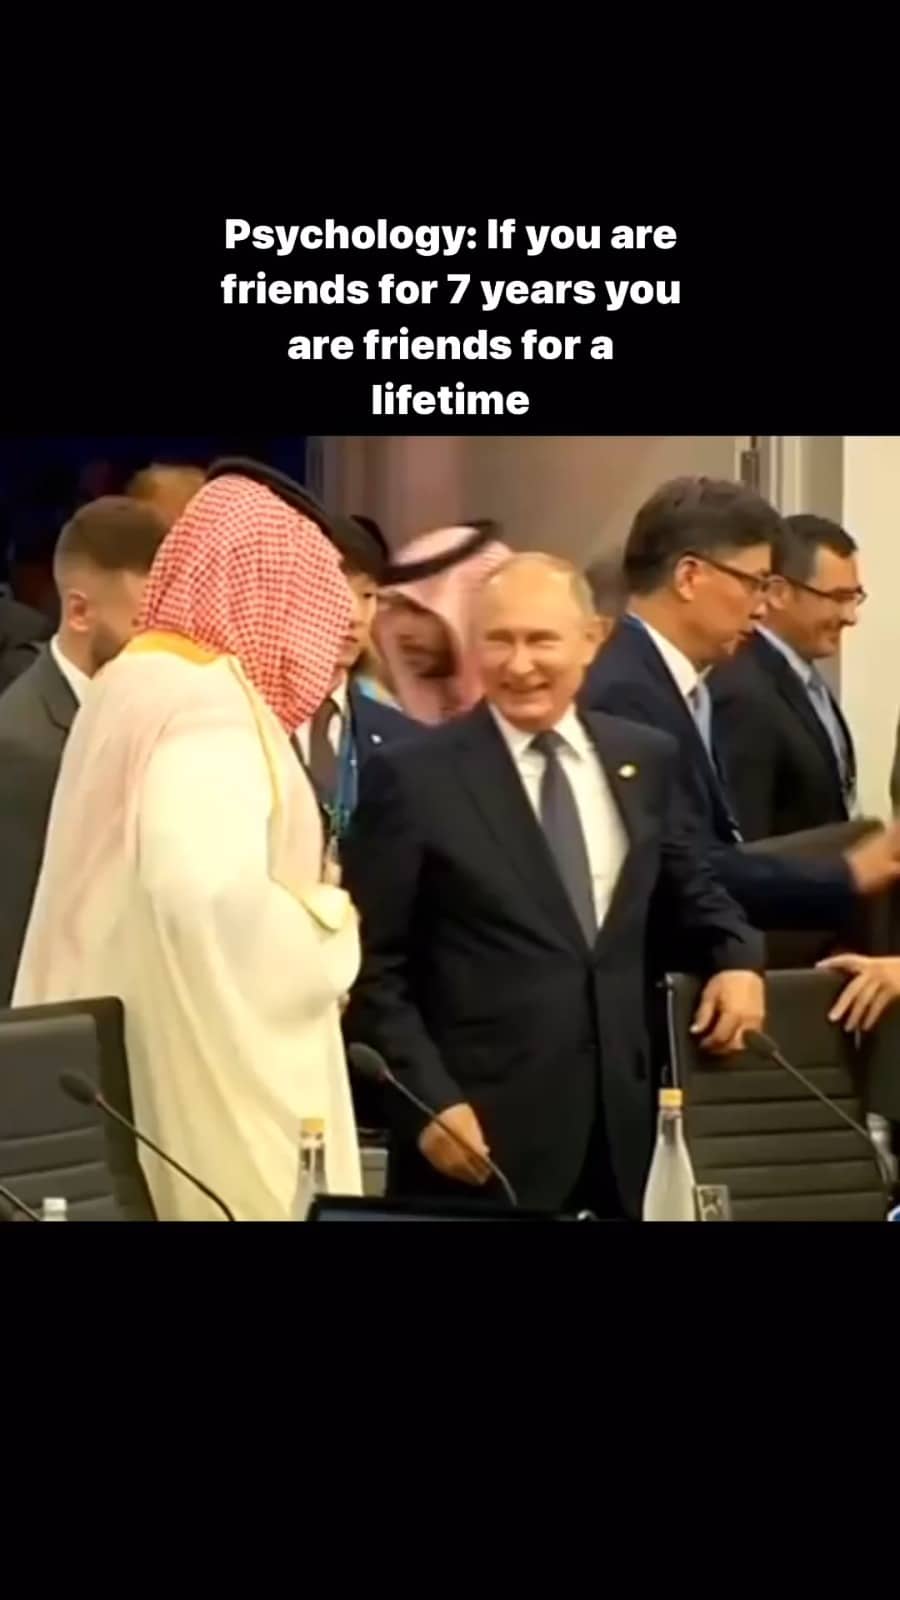 Putin’s friendship with Crown Prince of Saudi Arabia is special